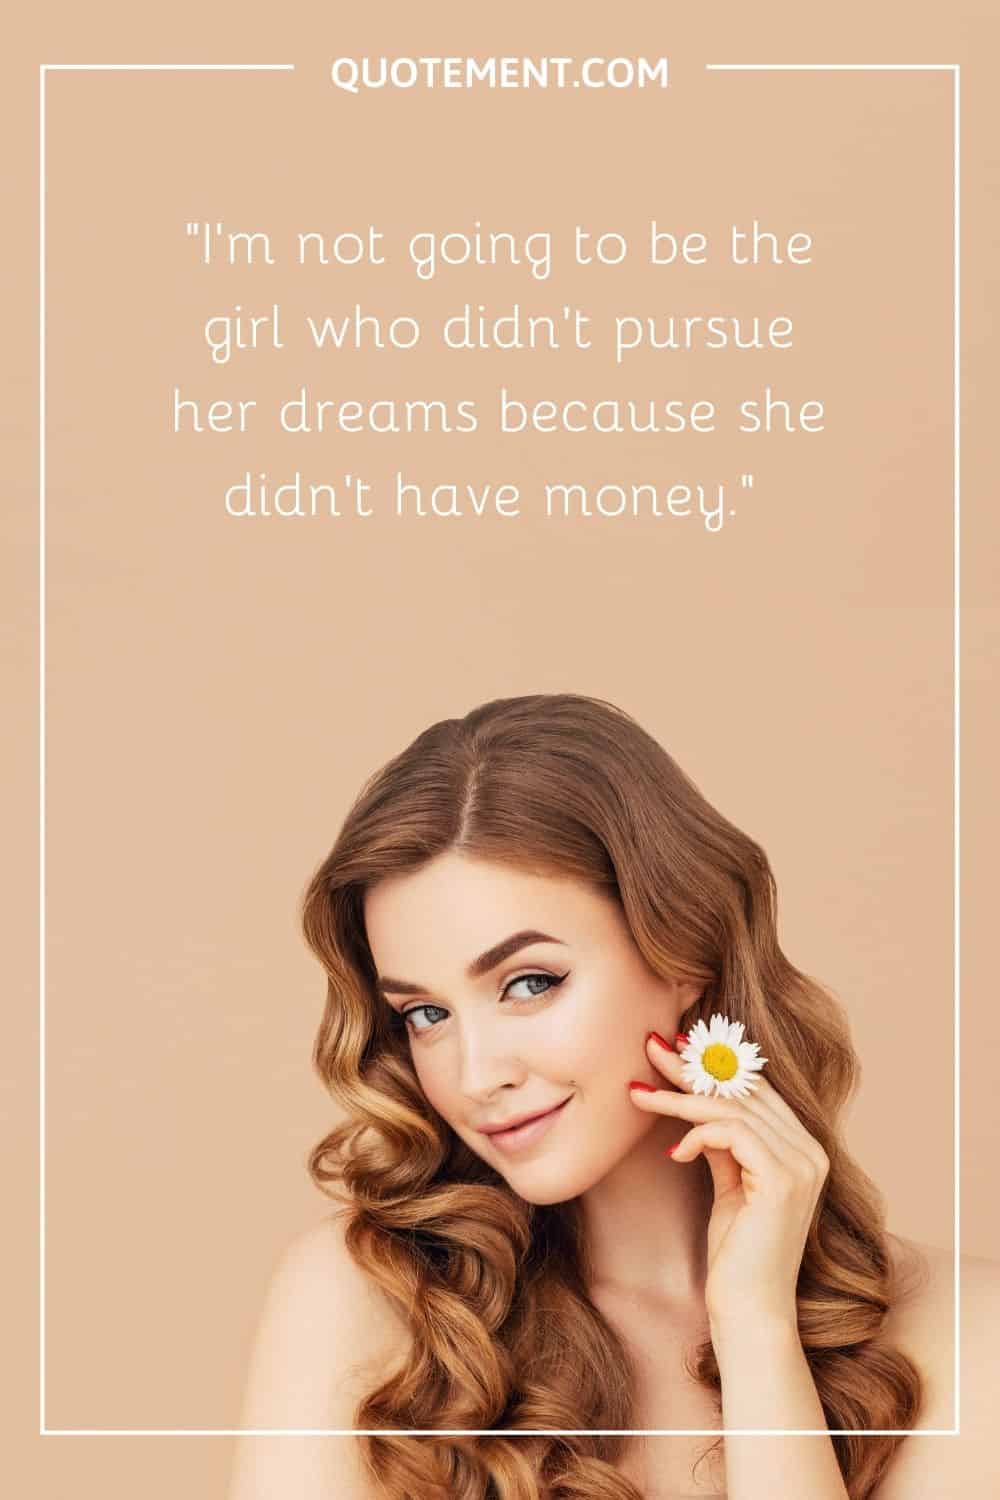 I'm not going to be the girl who didn't pursue her dreams because she didn't have money